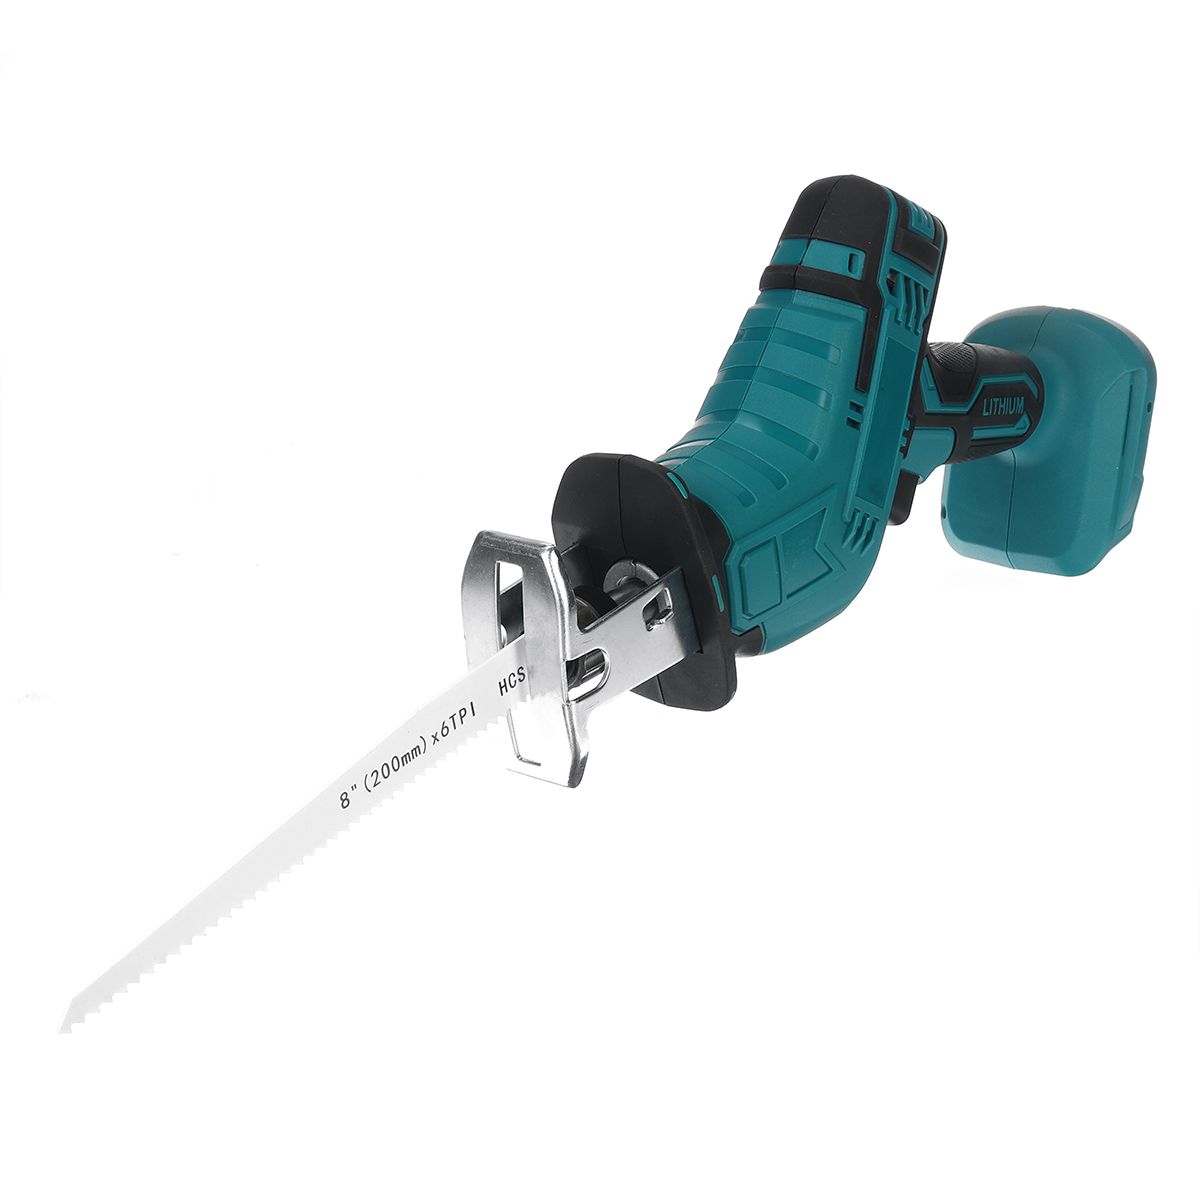 10MM-Cordless-Electric-Reciprocating-Saw-Replacement-For-Makita-18V-1750194